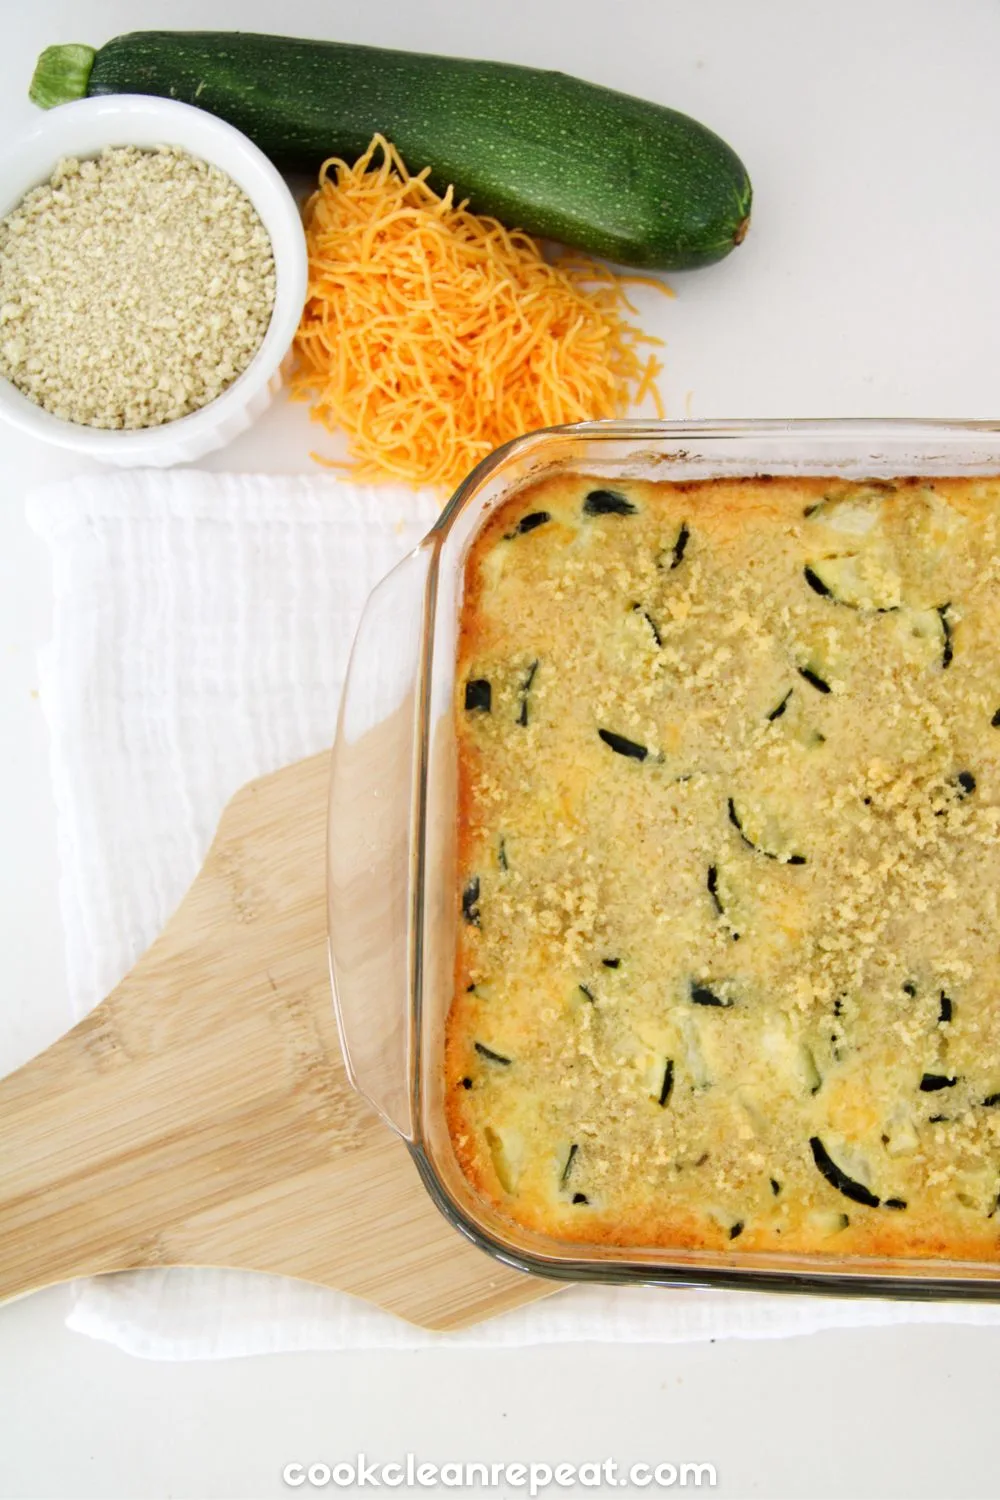 Zucchini Casserole in a casserole dish brown and crispy from being baked